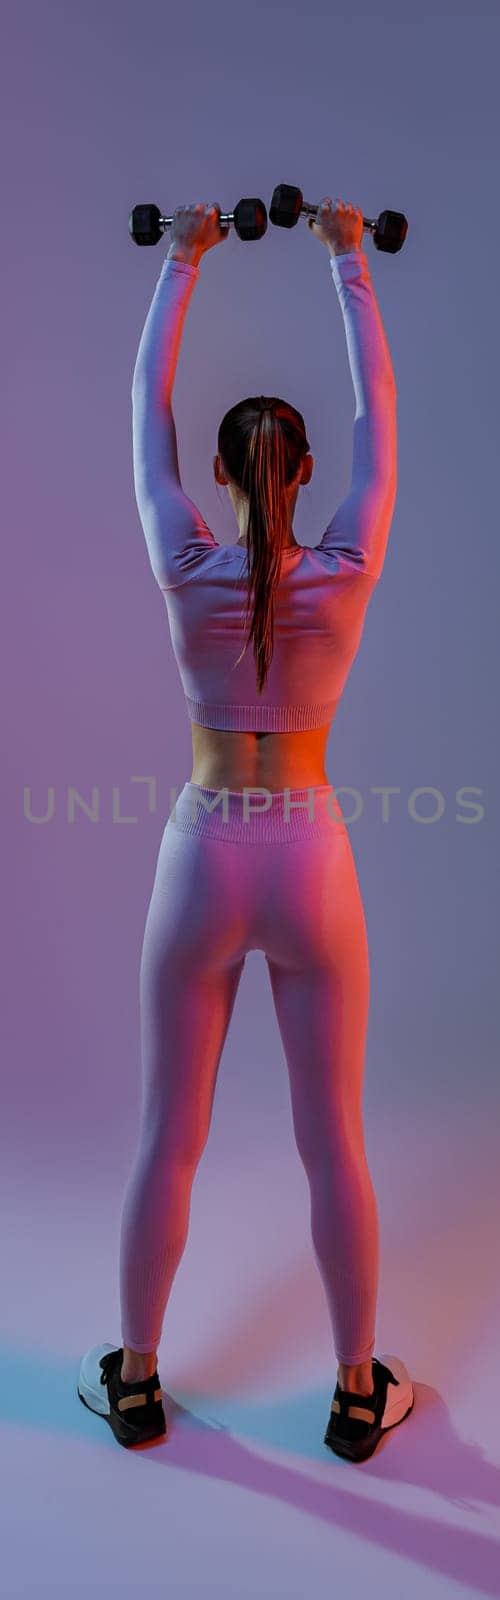 Back view of fitness woman doing exercises with dumbbells on studio background with colored filter by Yaroslav_astakhov